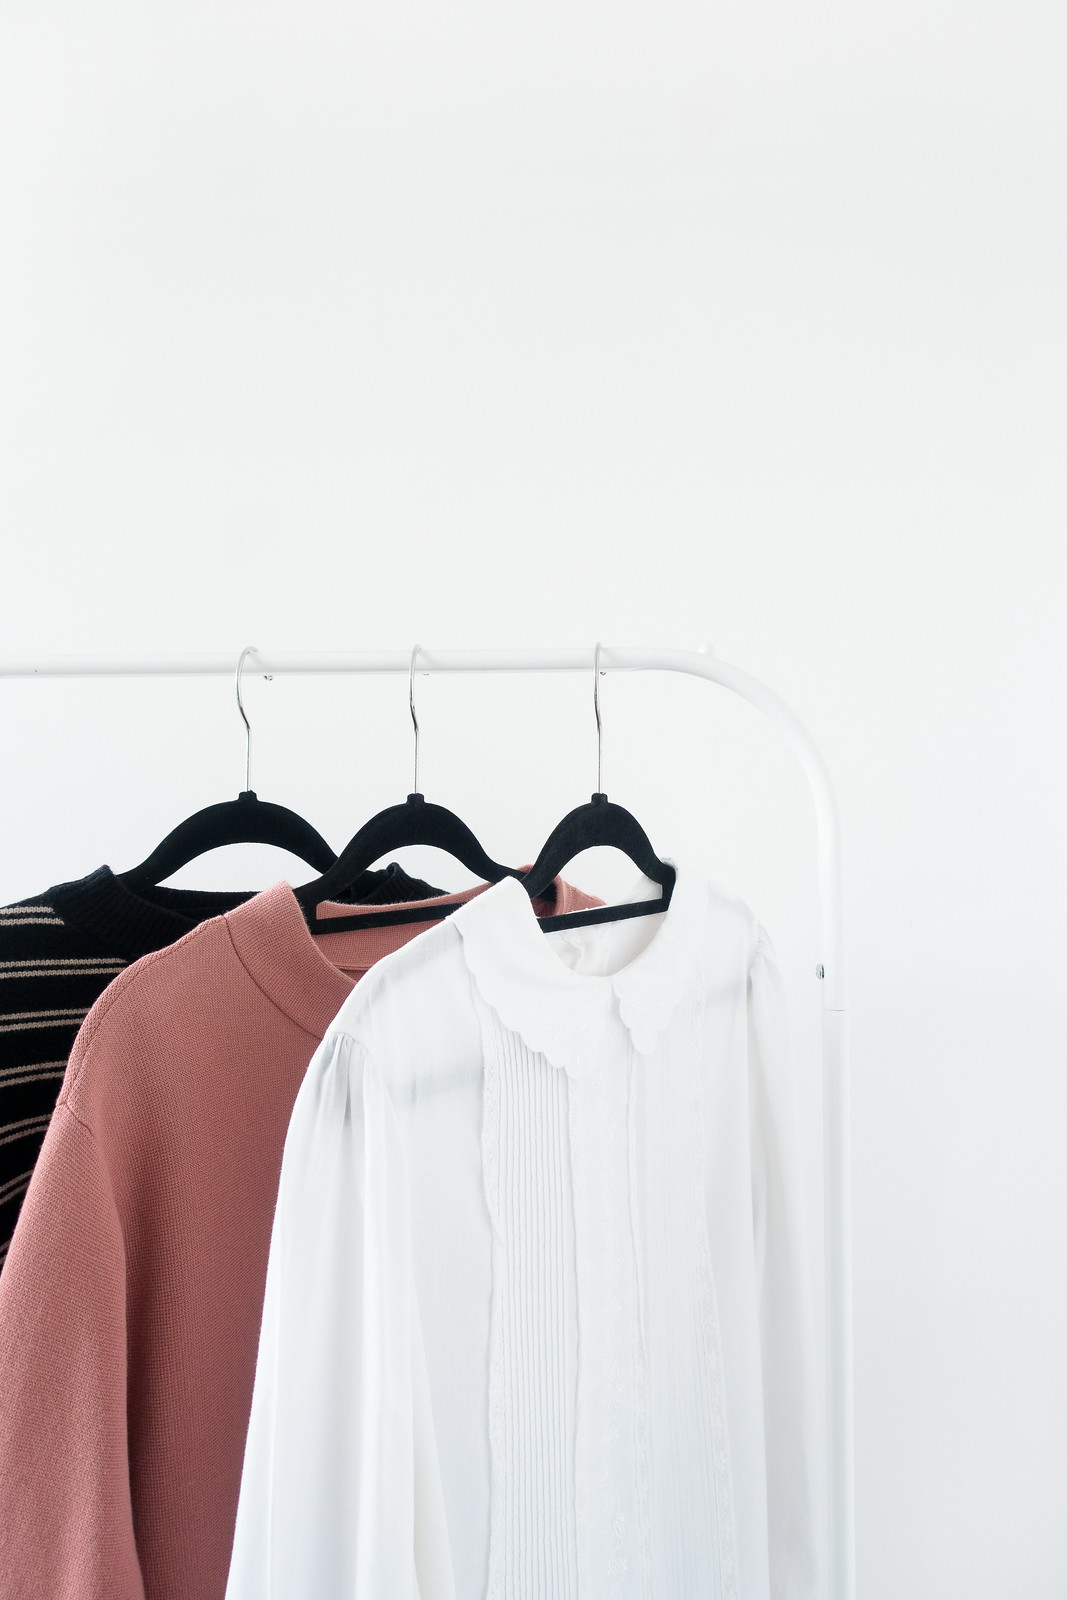 Creating A Sustainable Wardrobe